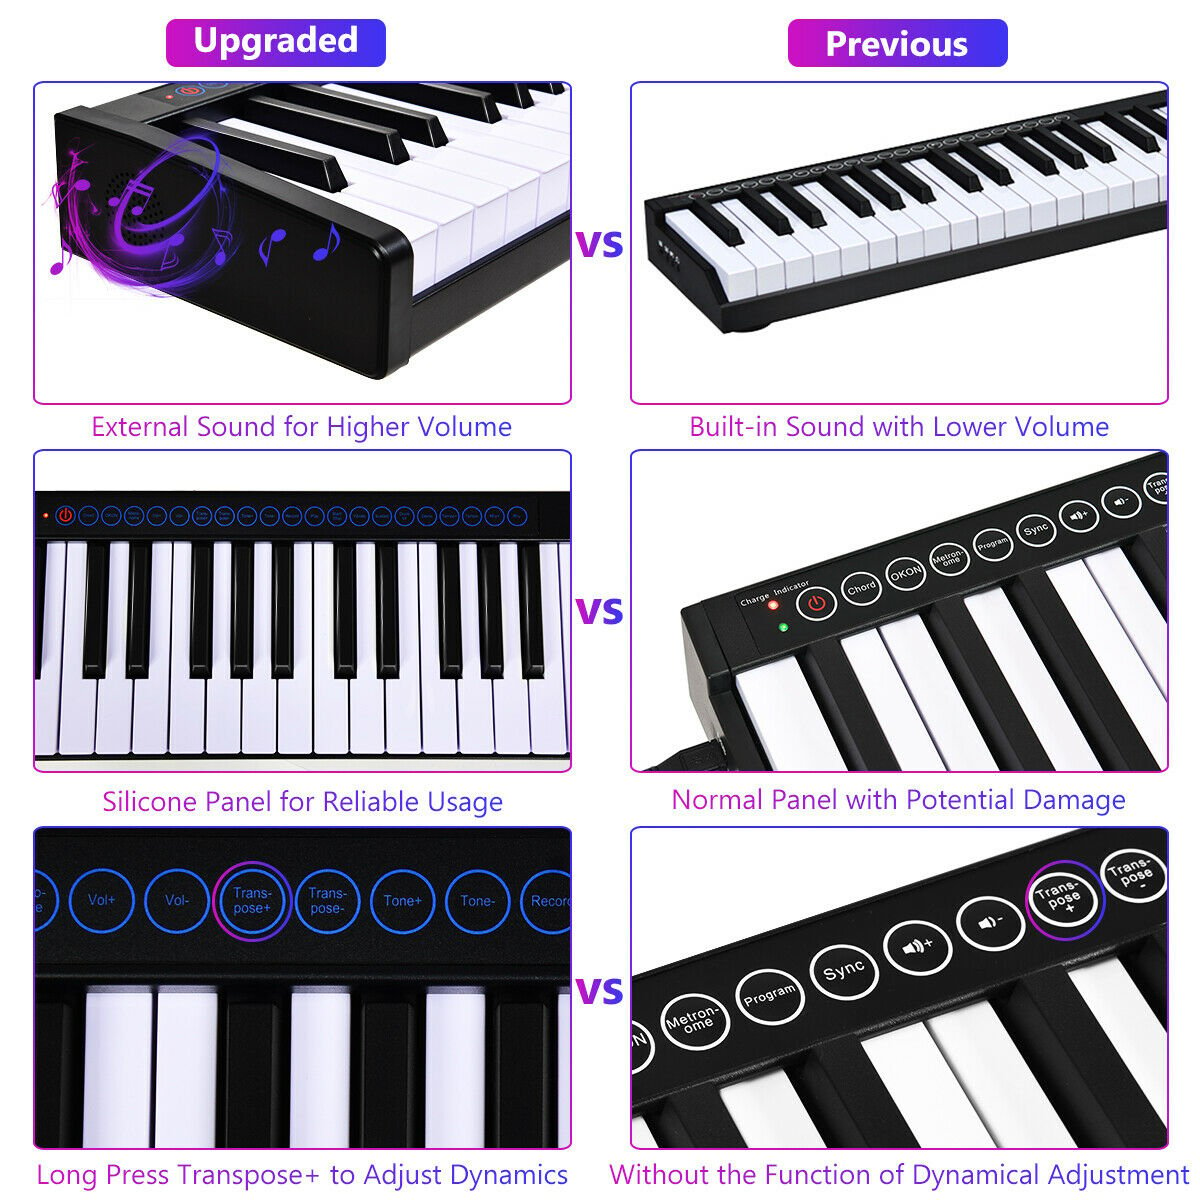 88-Key Portable Electronic Piano with  Voice Function, Black